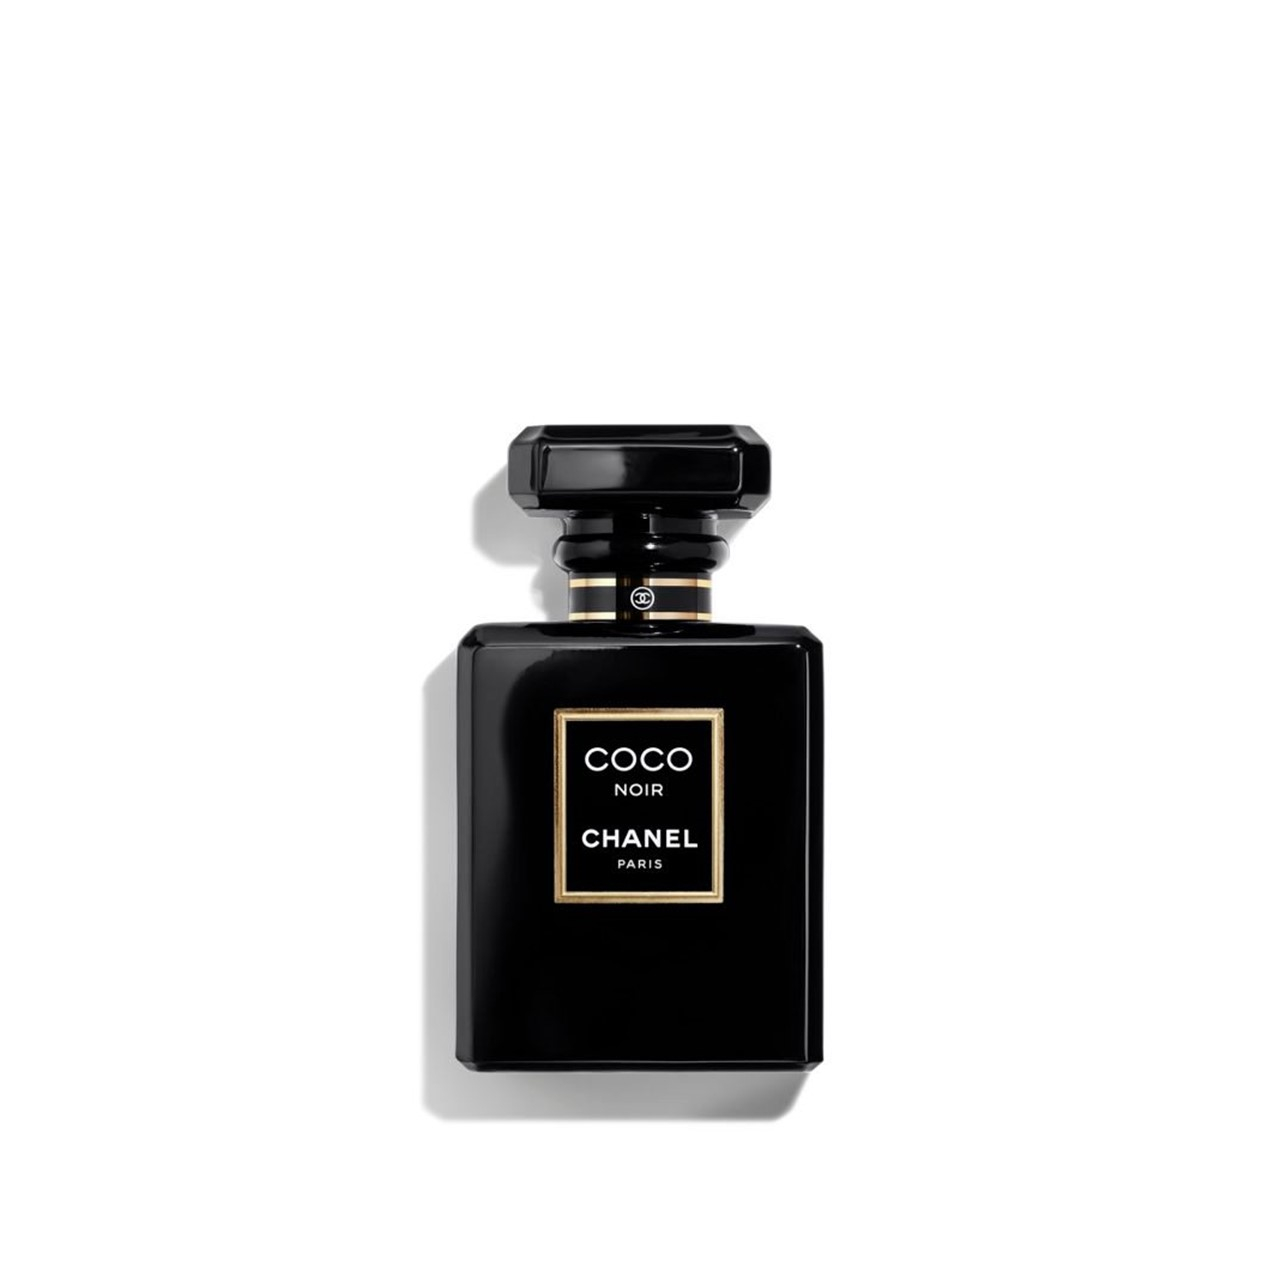 ION Orchard GABRIELLE CHANEL ESSENCE Is Now Available In A, 49% OFF